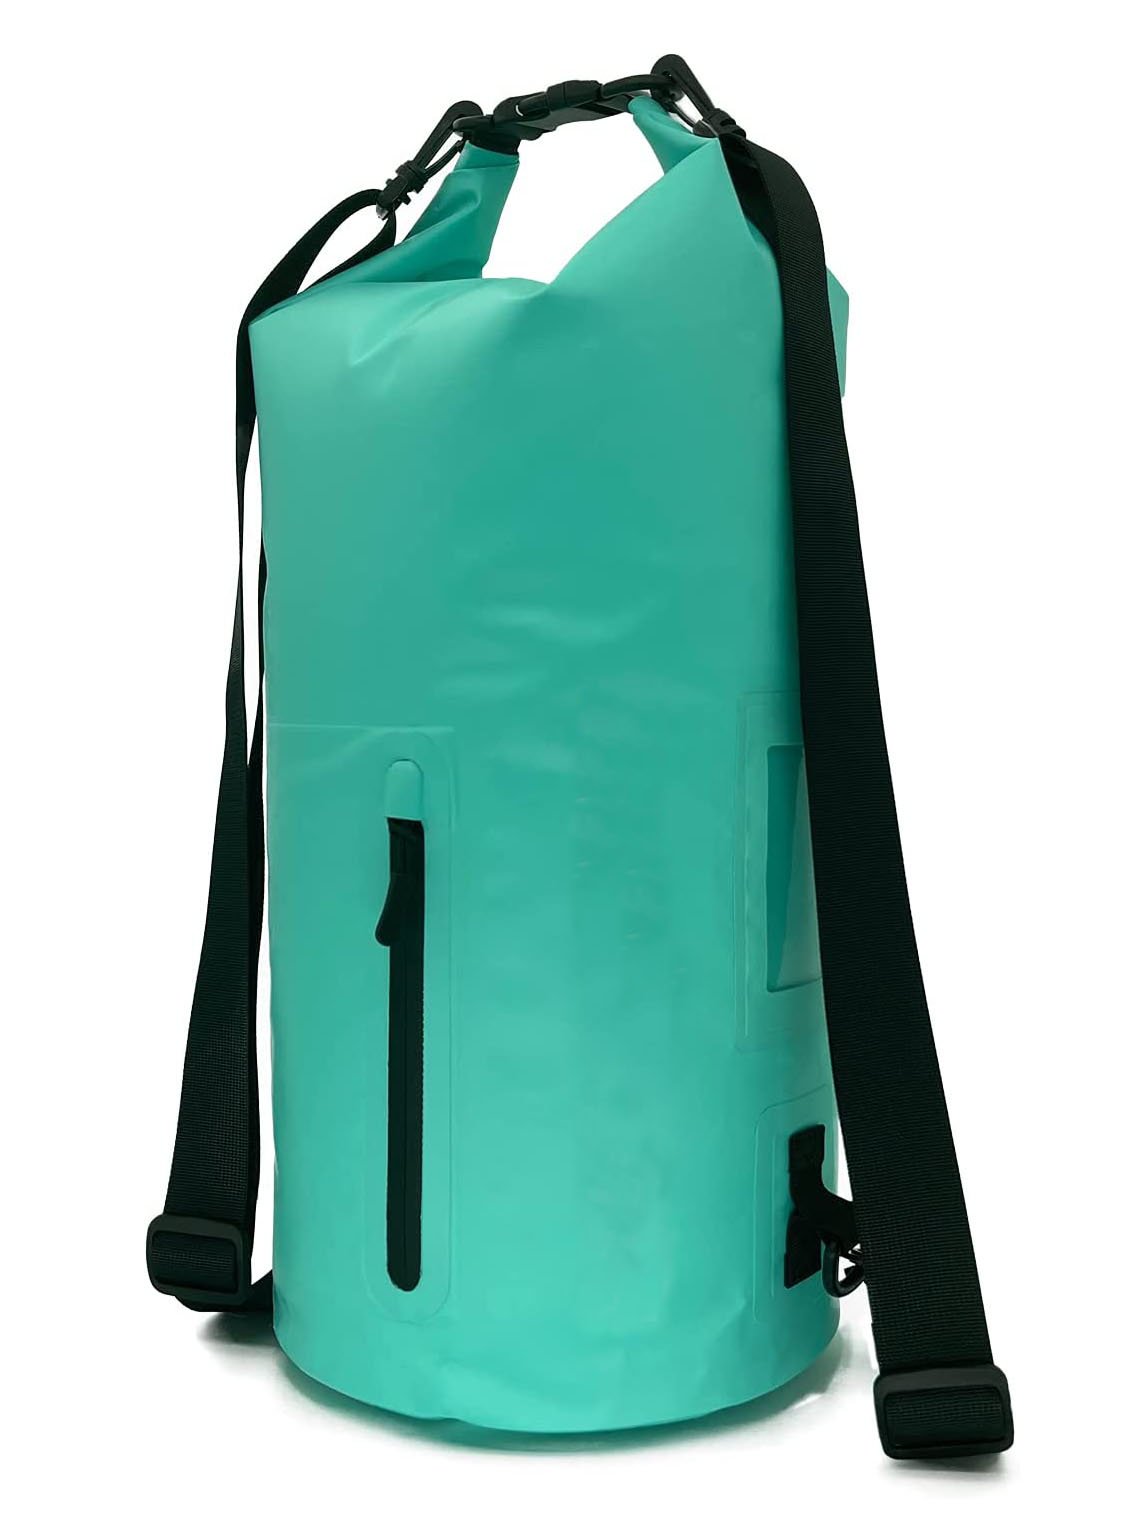 Waterproof Dry Bag with Front Zippered Pocket Roll Top Floating Waterproof Bag